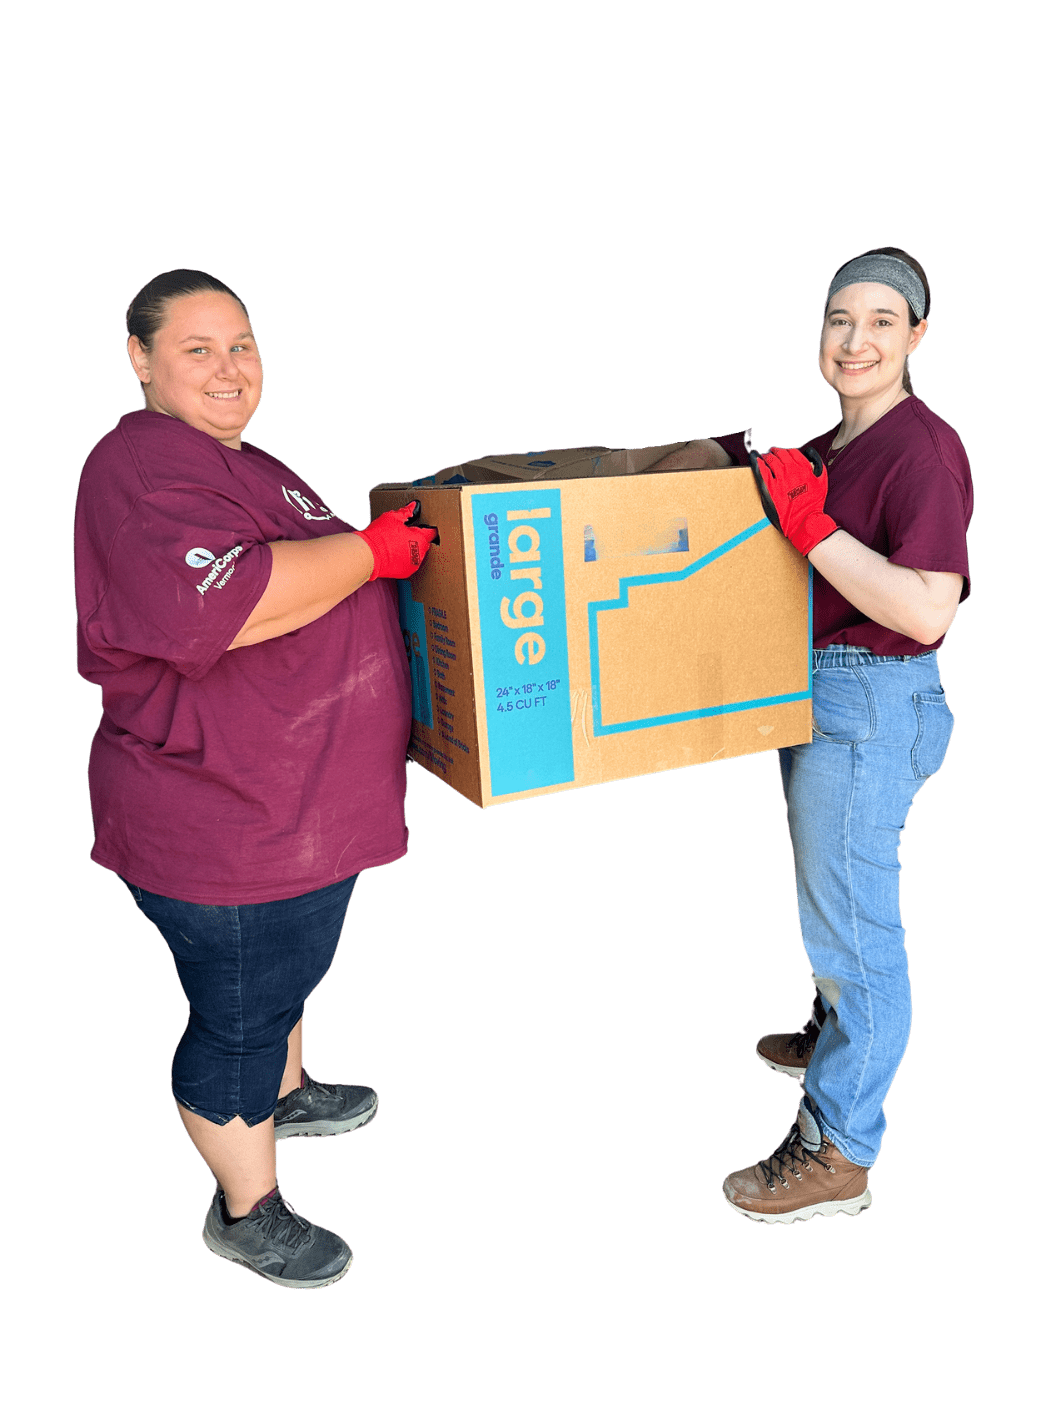 Two volunteers at ReSOURCE in maroon shirts and gloves, collaboratively carrying a large donation box, exemplifying the teamwork involved in ReSOURCE's poverty and flood relief efforts in Barre, Vermont.